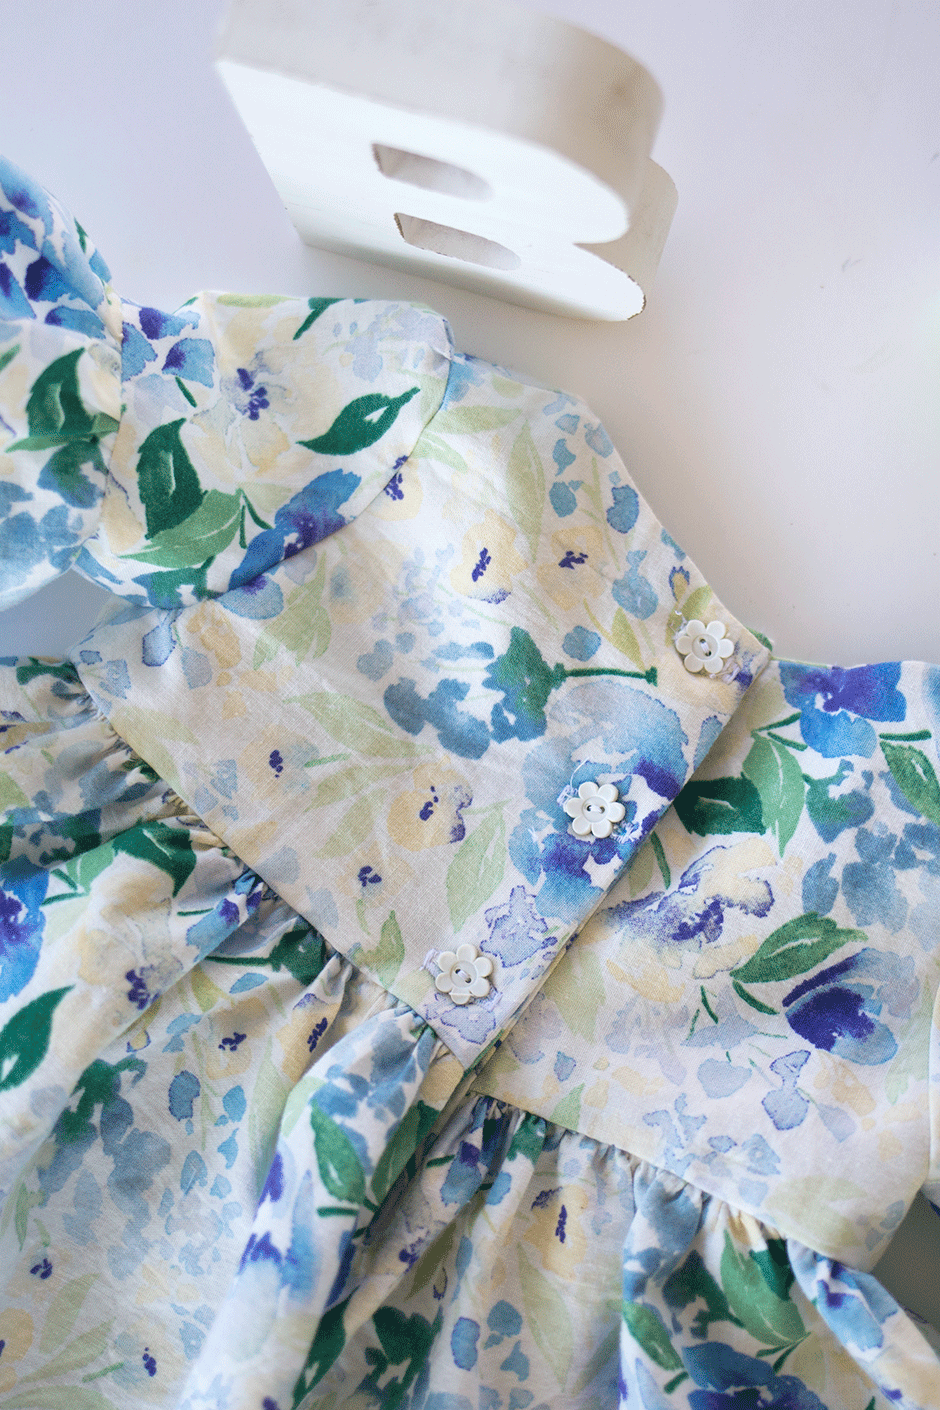 This simple pattern hack will show you how to make a darling on-trend bell sleeve baby dress DIY for the little bundle of joy! Take a break from pink by using this beautiful blue and green floral fabric; it's the perfect addition to any little girls' wardrobe. Read on for the ruffle sleeve tutorial and details on this gorgeous quilting cotton.